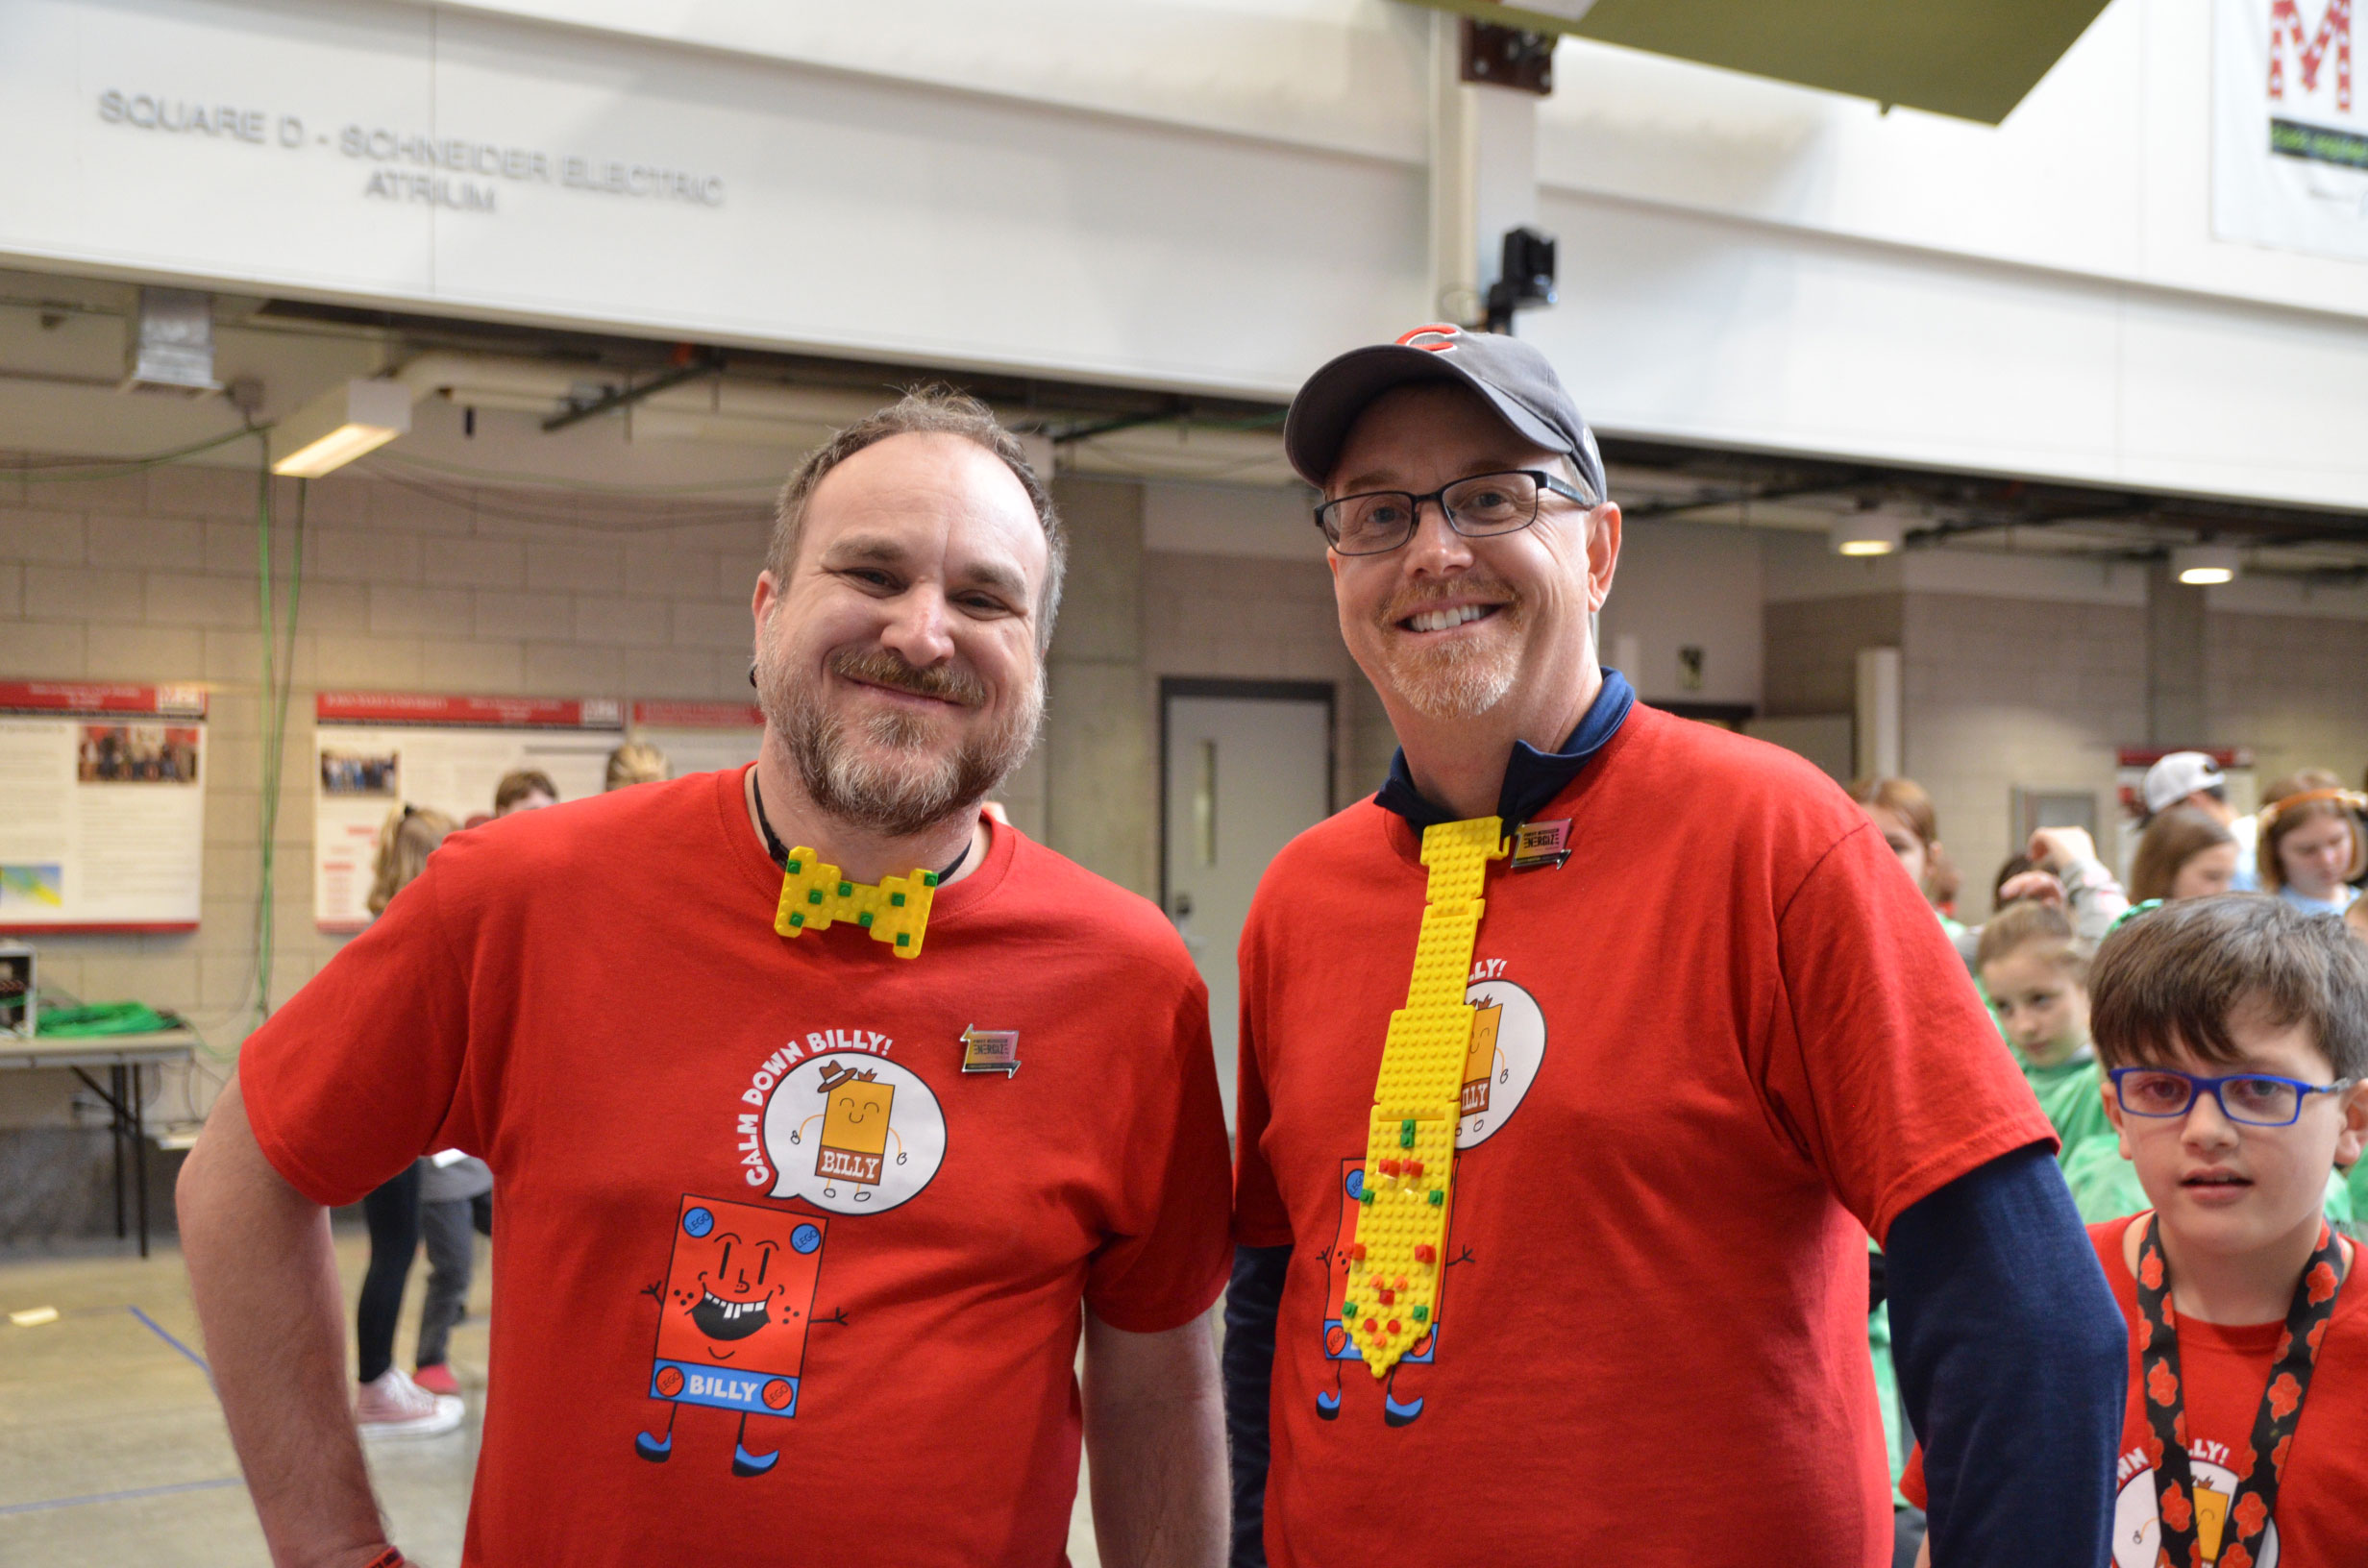 Two FIRST LEGO League coaches posing for the camera wearing neckties made out of LEGO